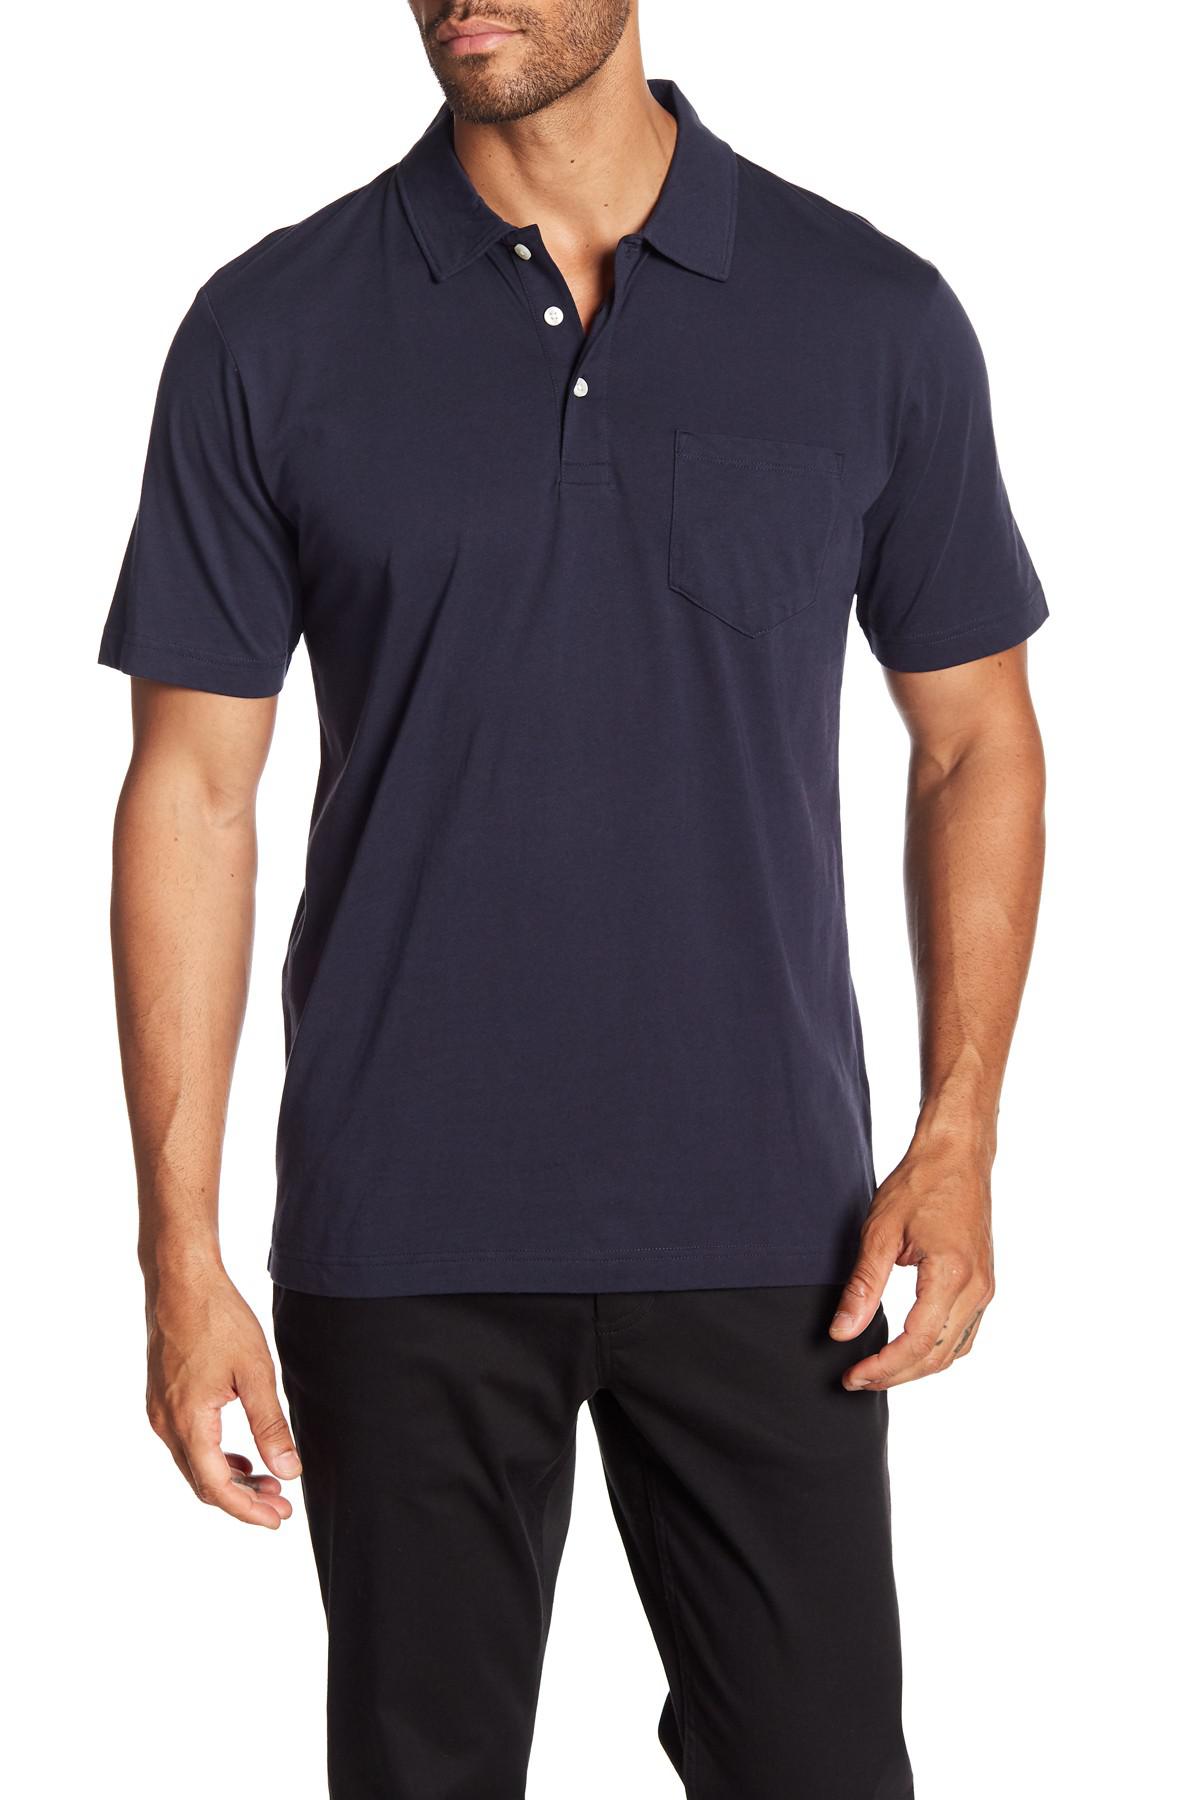 Brooks Brothers Cotton Vintage Pocket Polo in Navy (Blue) for Men - Lyst